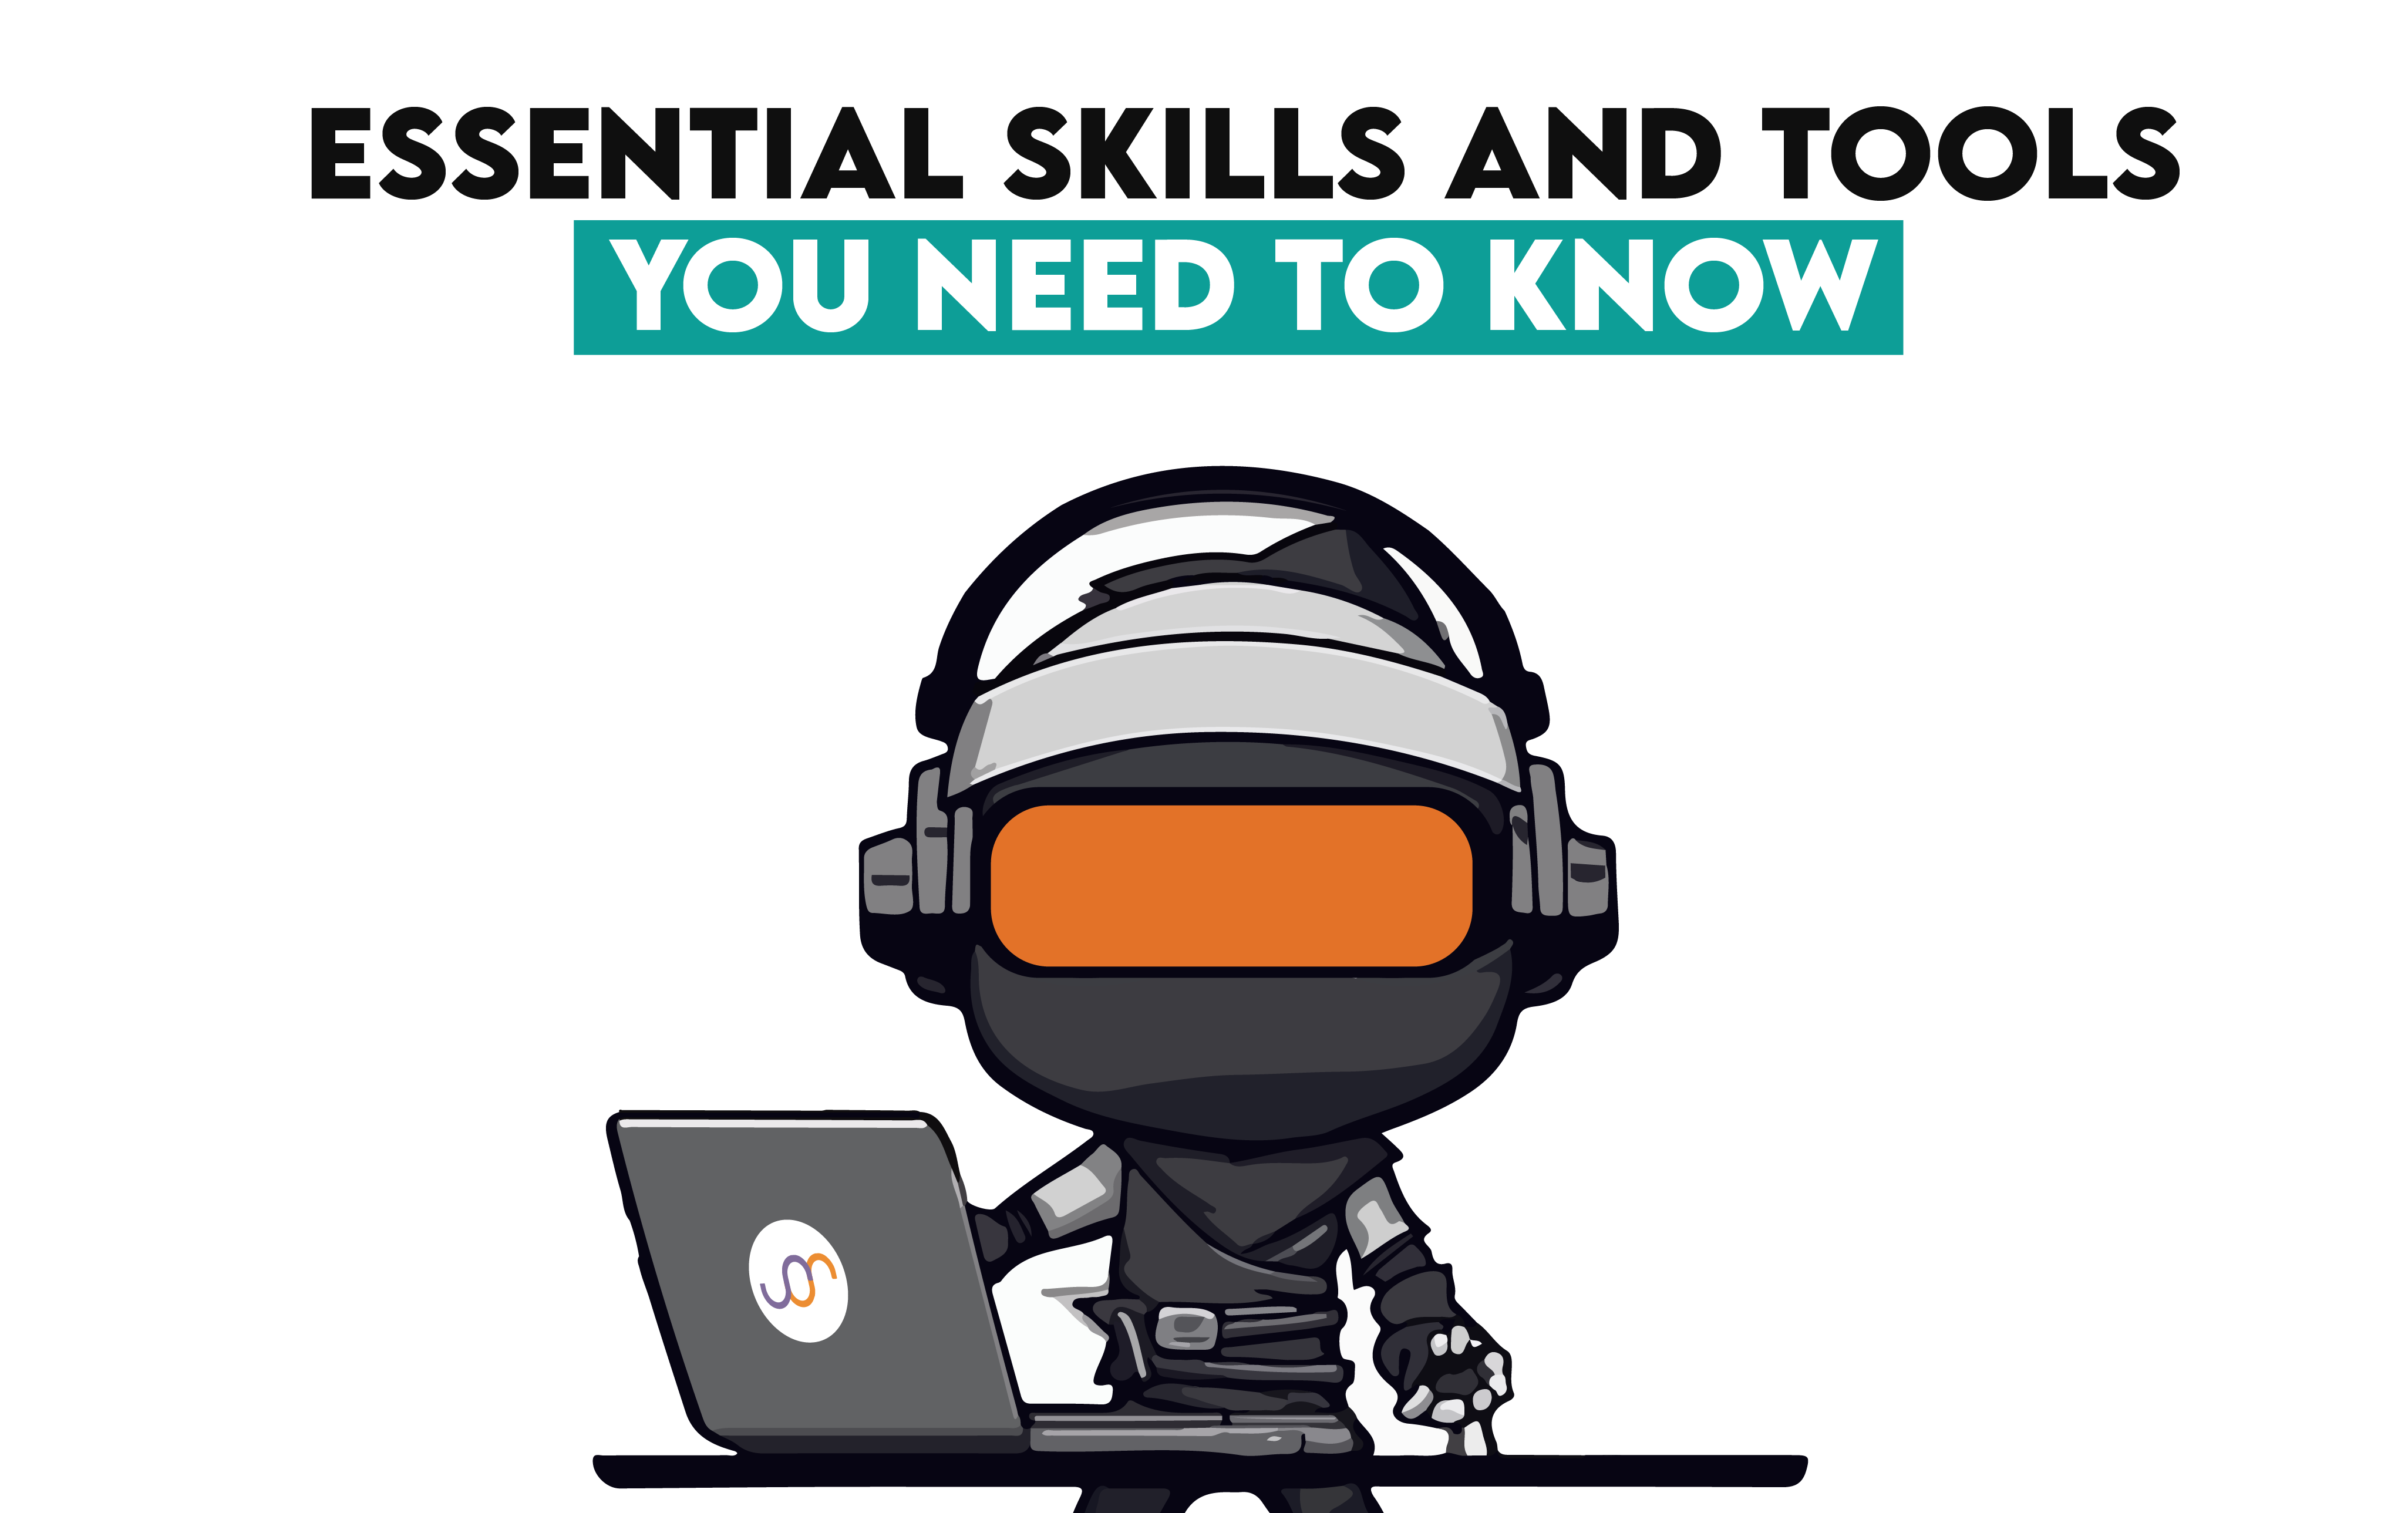 Essential Skills and Tools You Need To Know As an Entry Level Data Analyst